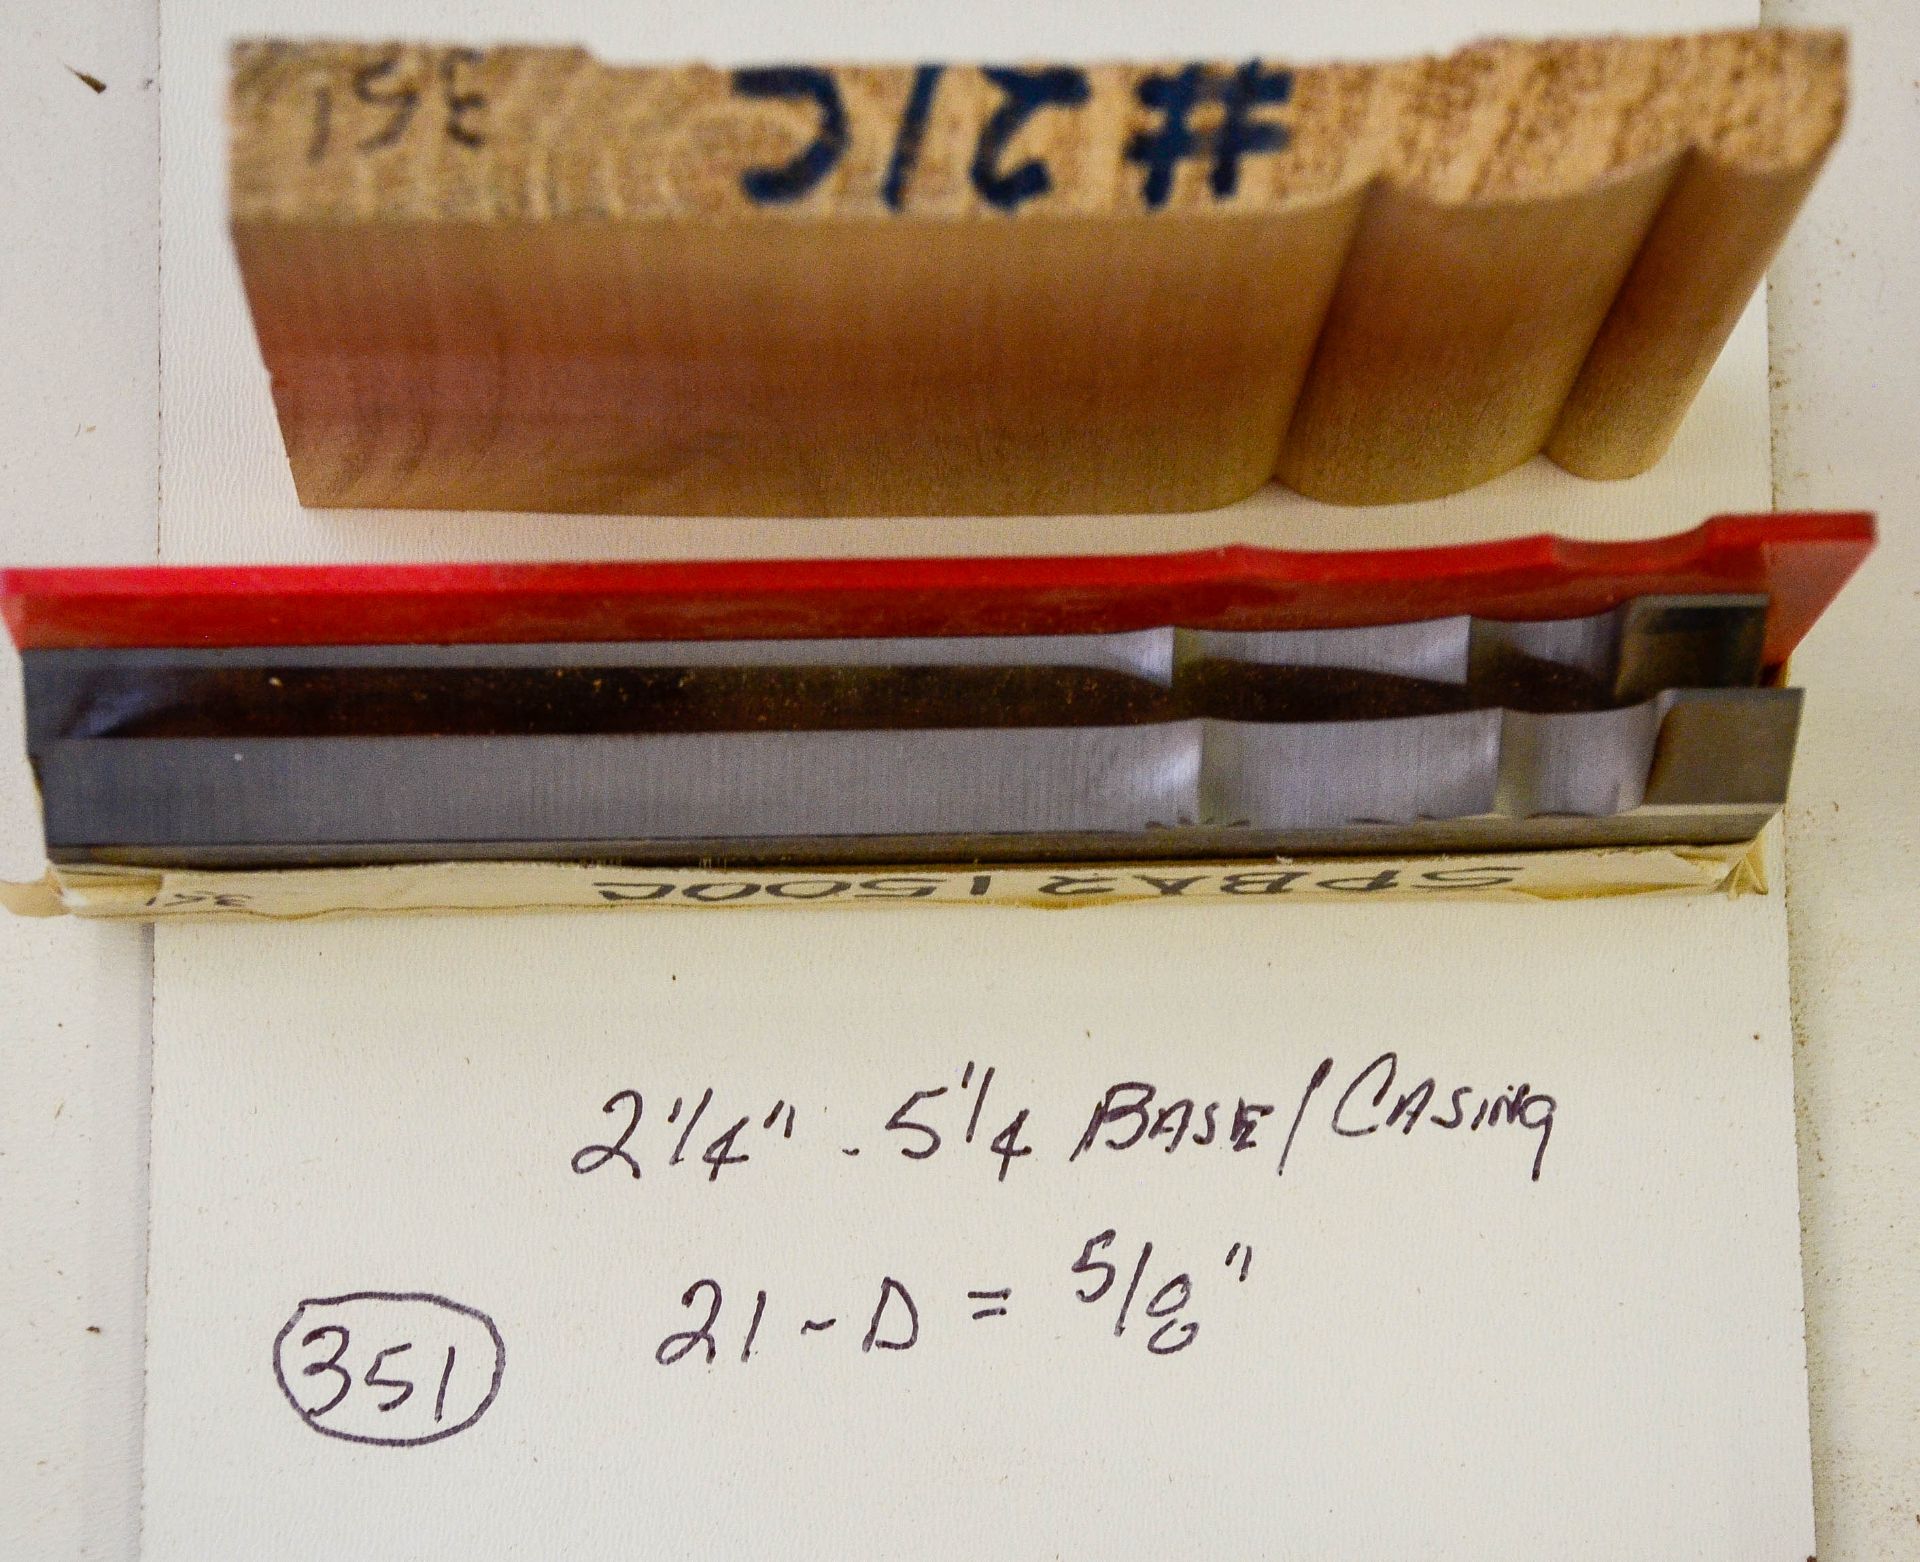 Moulding Knives, 2-1/4"- 5-1/4" Base/Case, 21 - D = 5/8", Knives are in Good Condition and Ready - Image 2 of 2